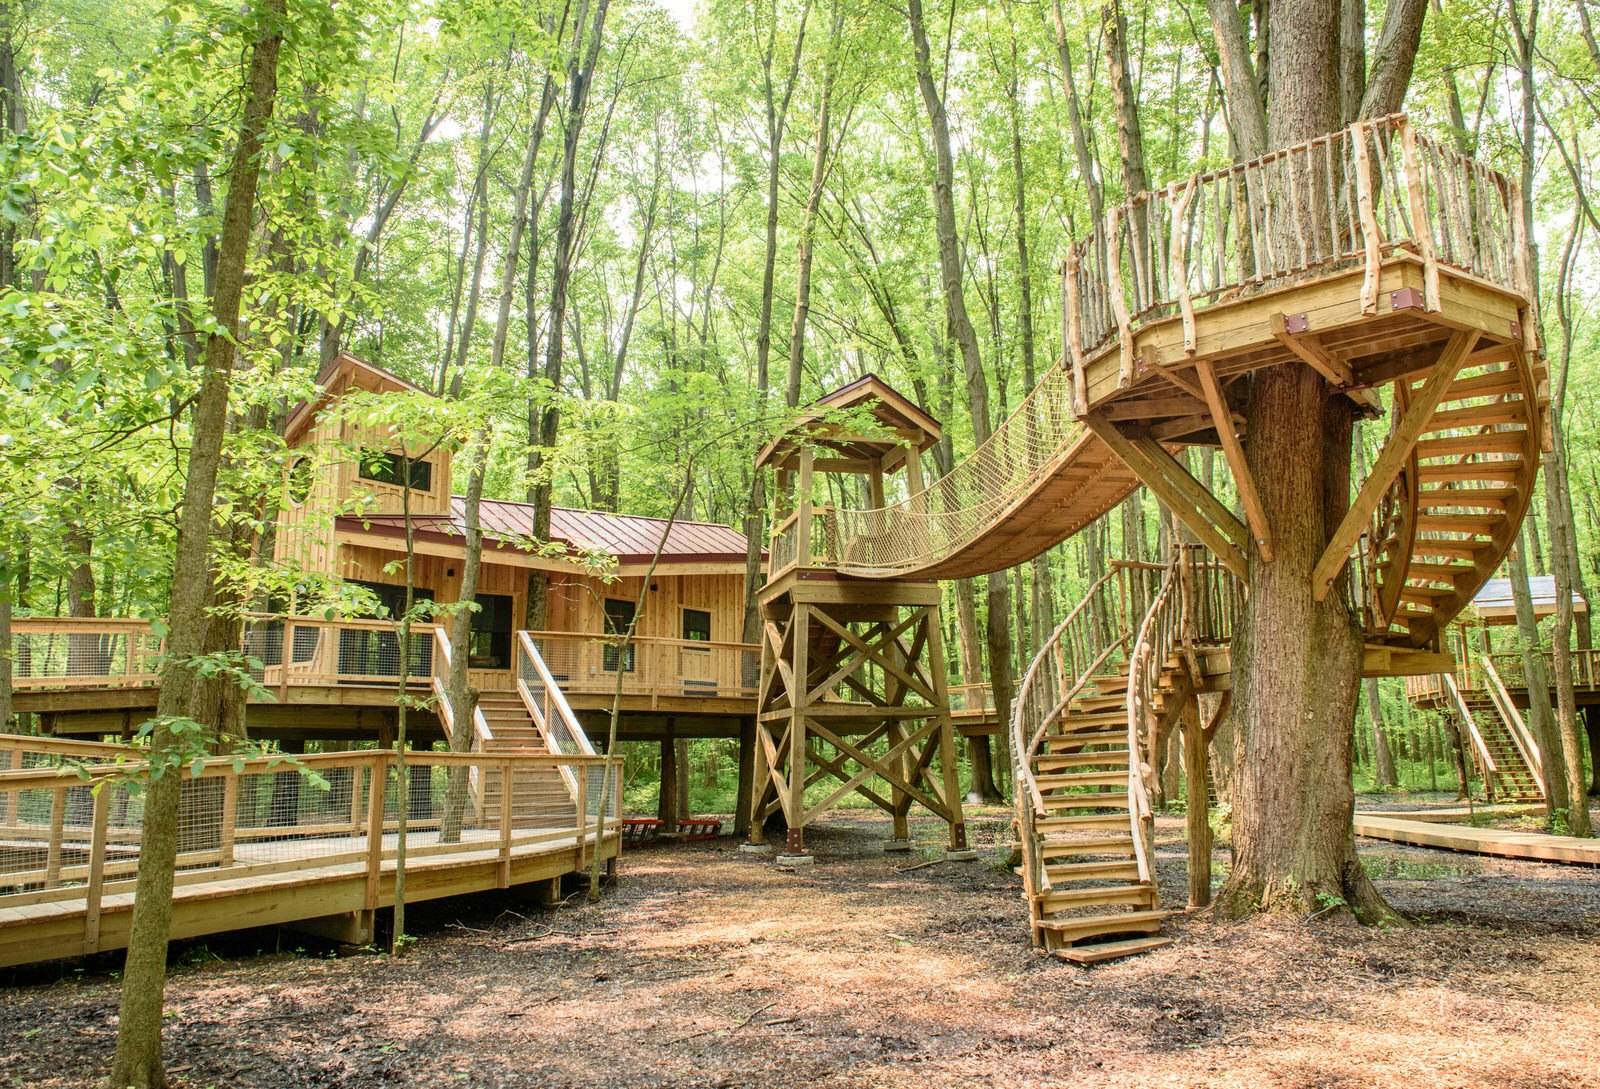 A series of treehouse buildings at Cannaley Treehouse Village, surrounded by bright green forest.